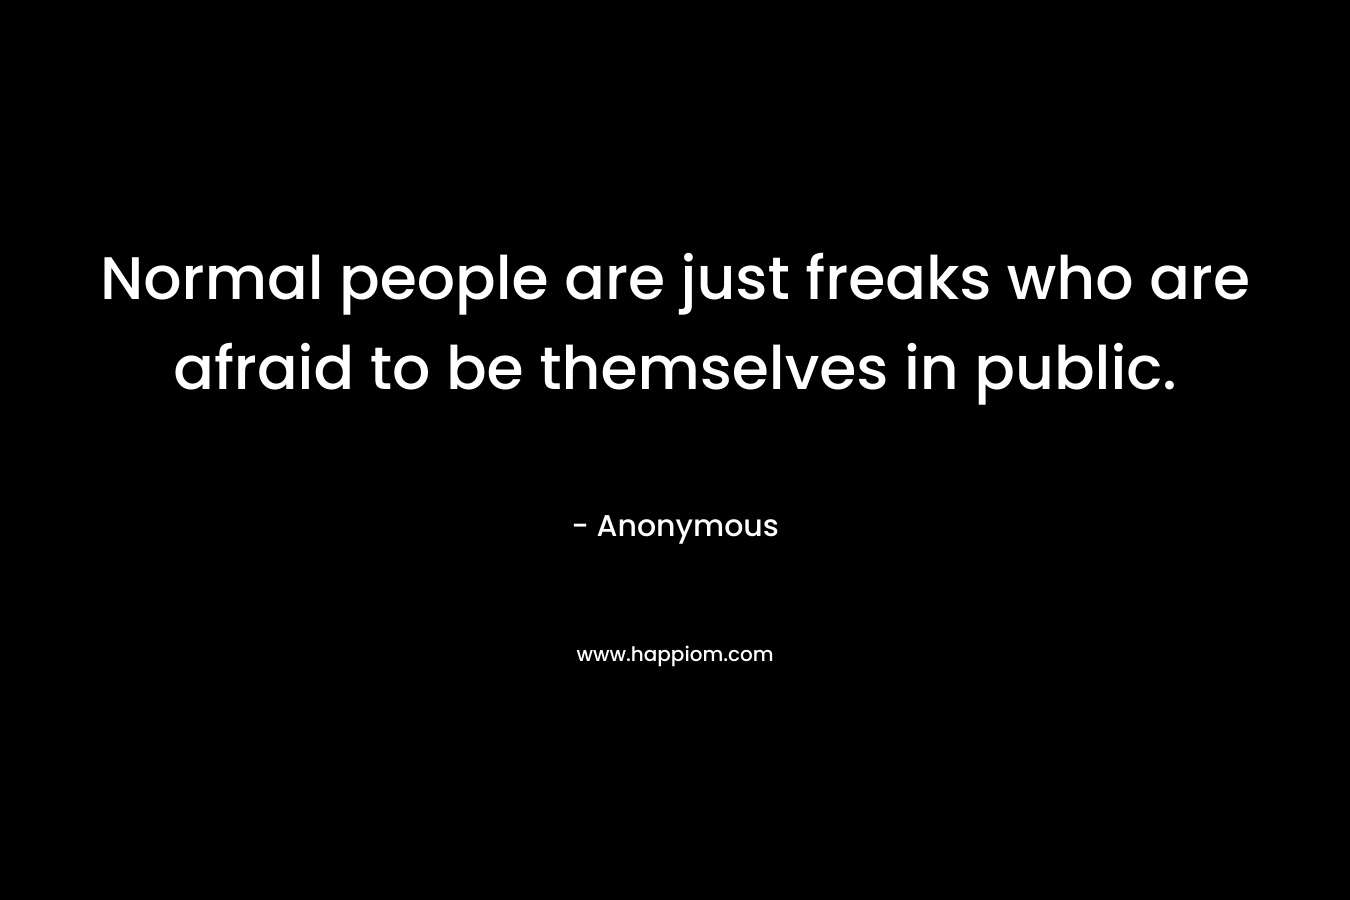 Normal people are just freaks who are afraid to be themselves in public.